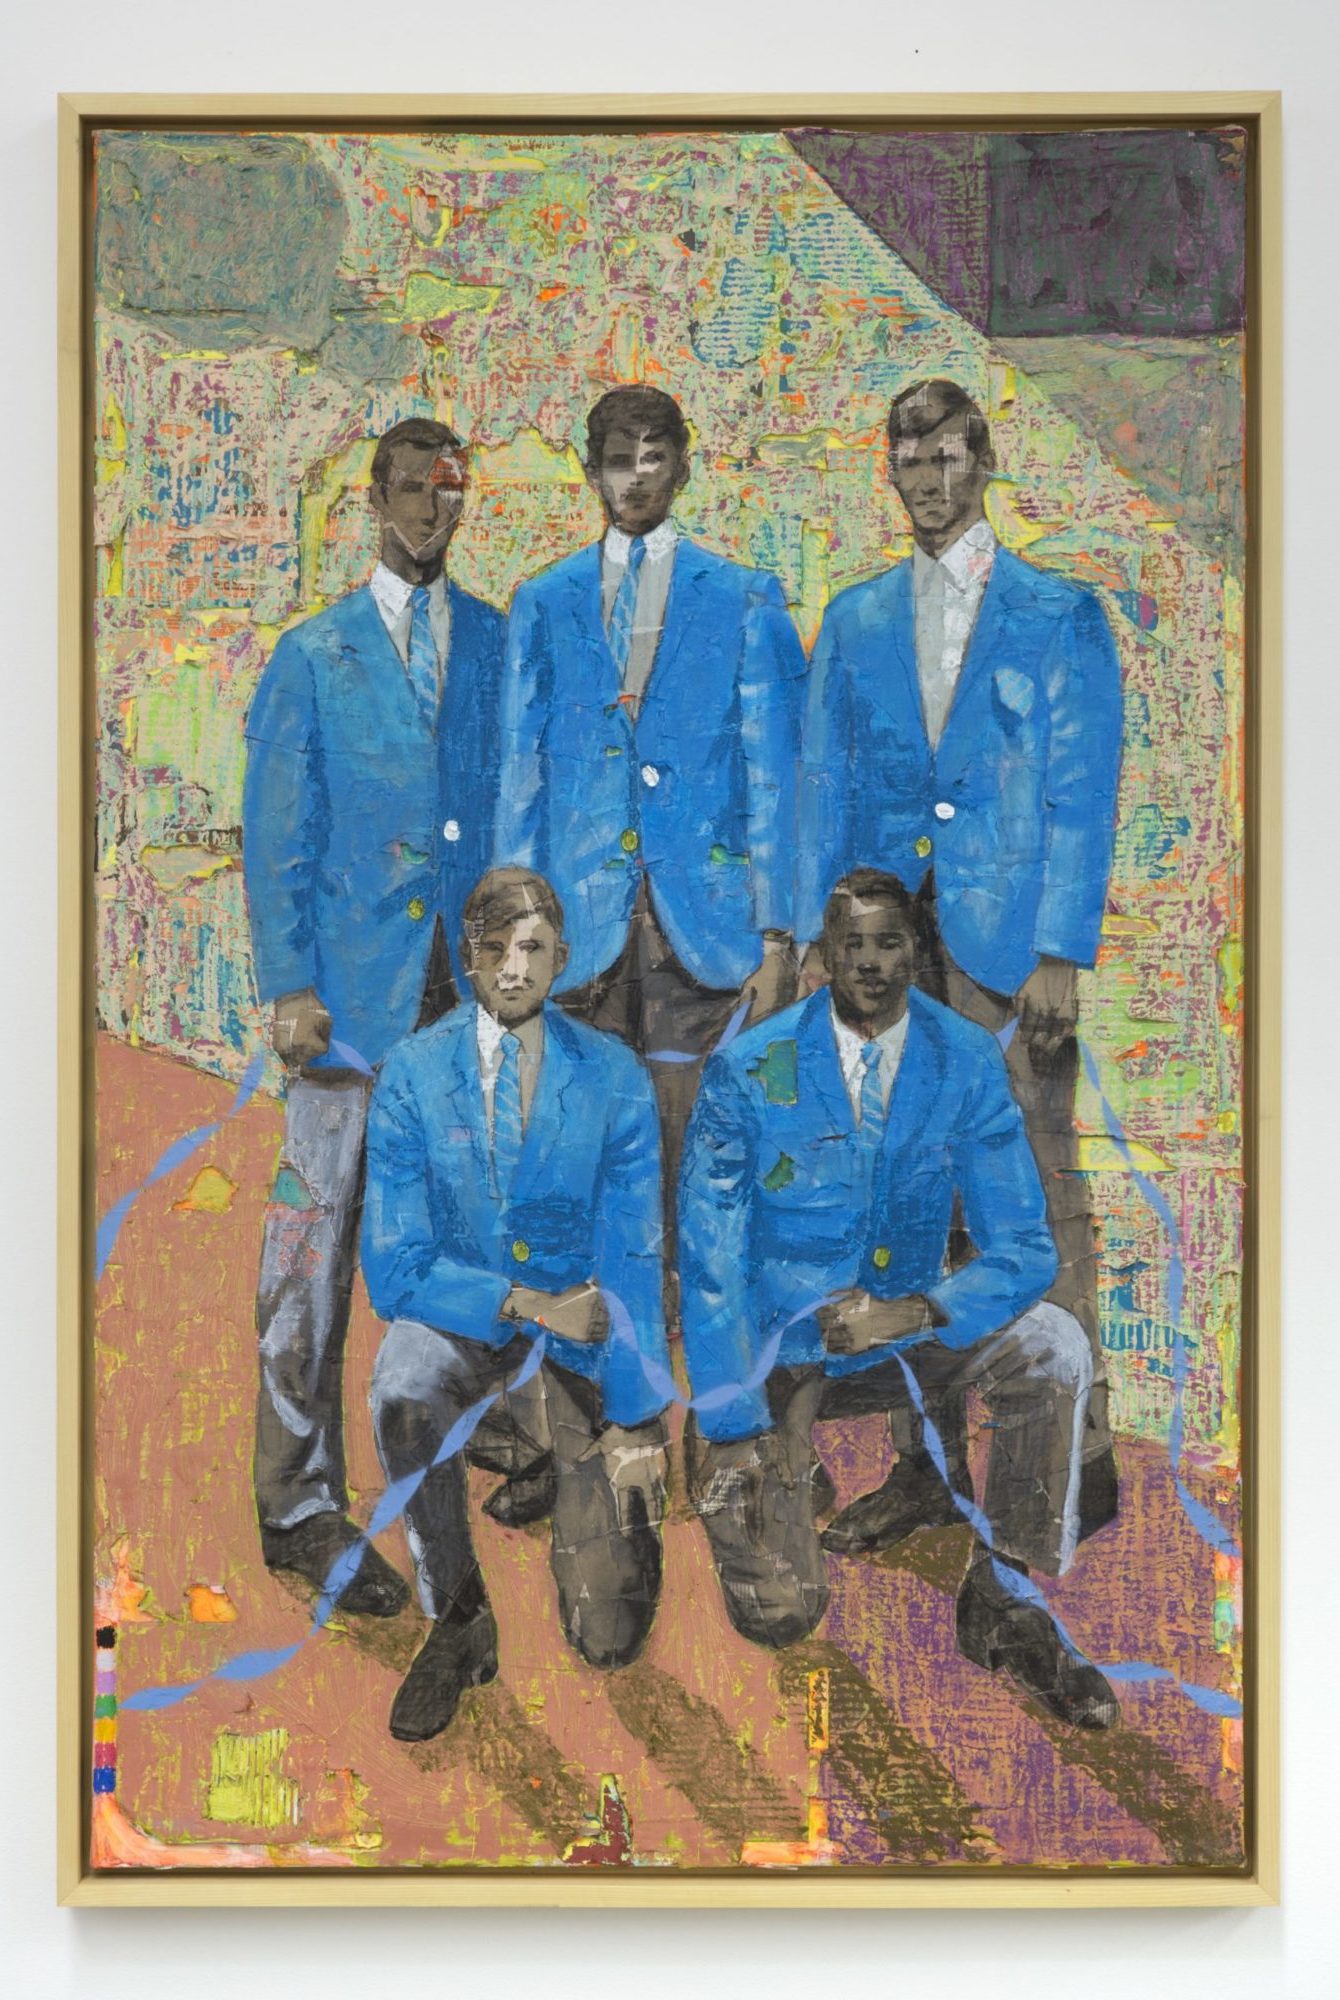 A painting of five individuals posing for a group photo. They are dressed in bright blue suit jackets and ties. None are smiling. Their hands are balled up into fists, each fist holding onto a circular blue ribbon that connects the five individuals in a loop.